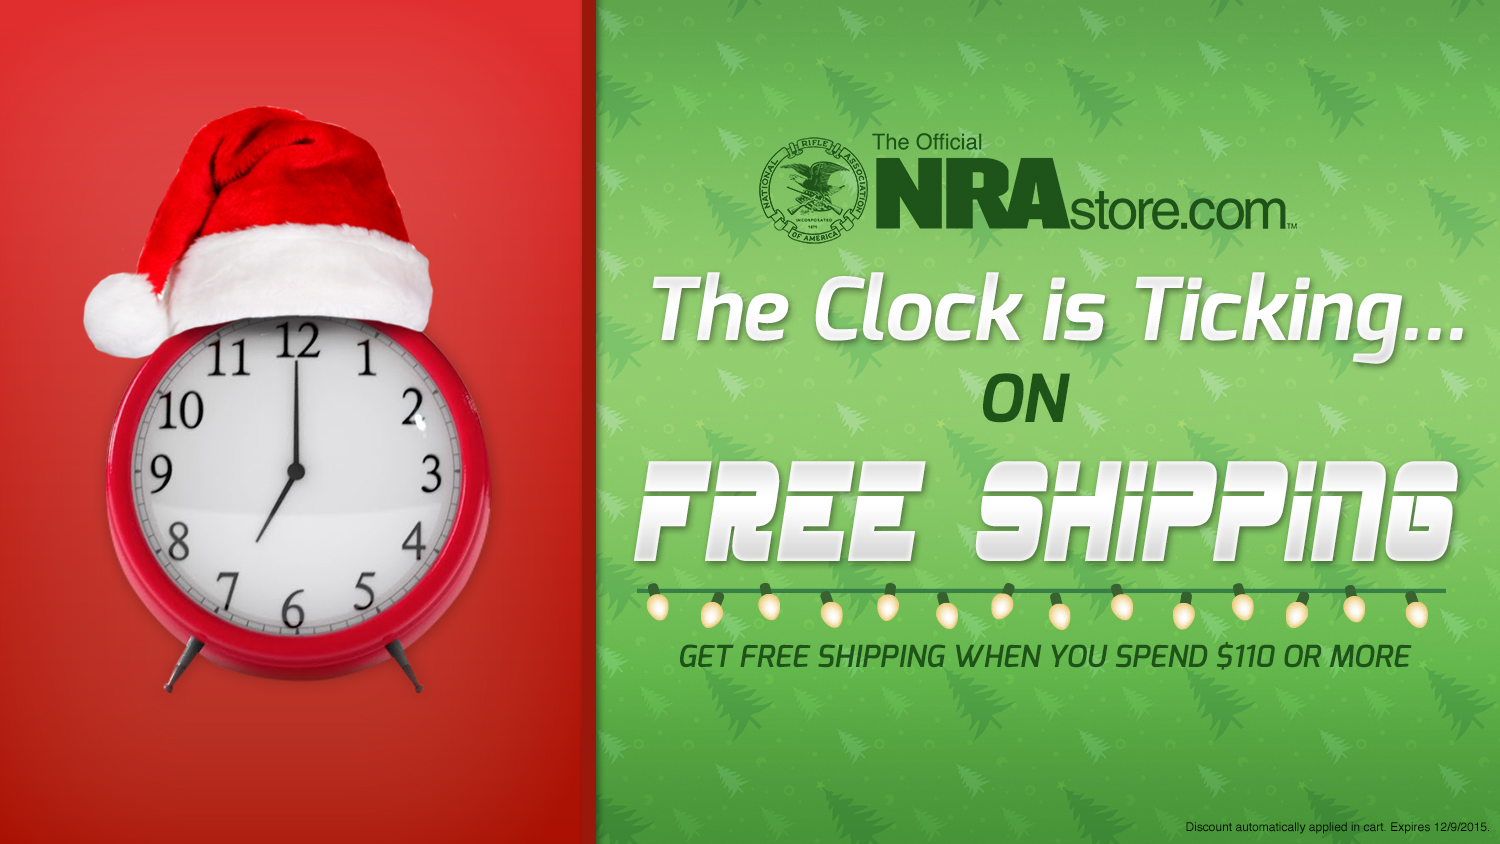 Two more days of free shipping on NRAstore.com